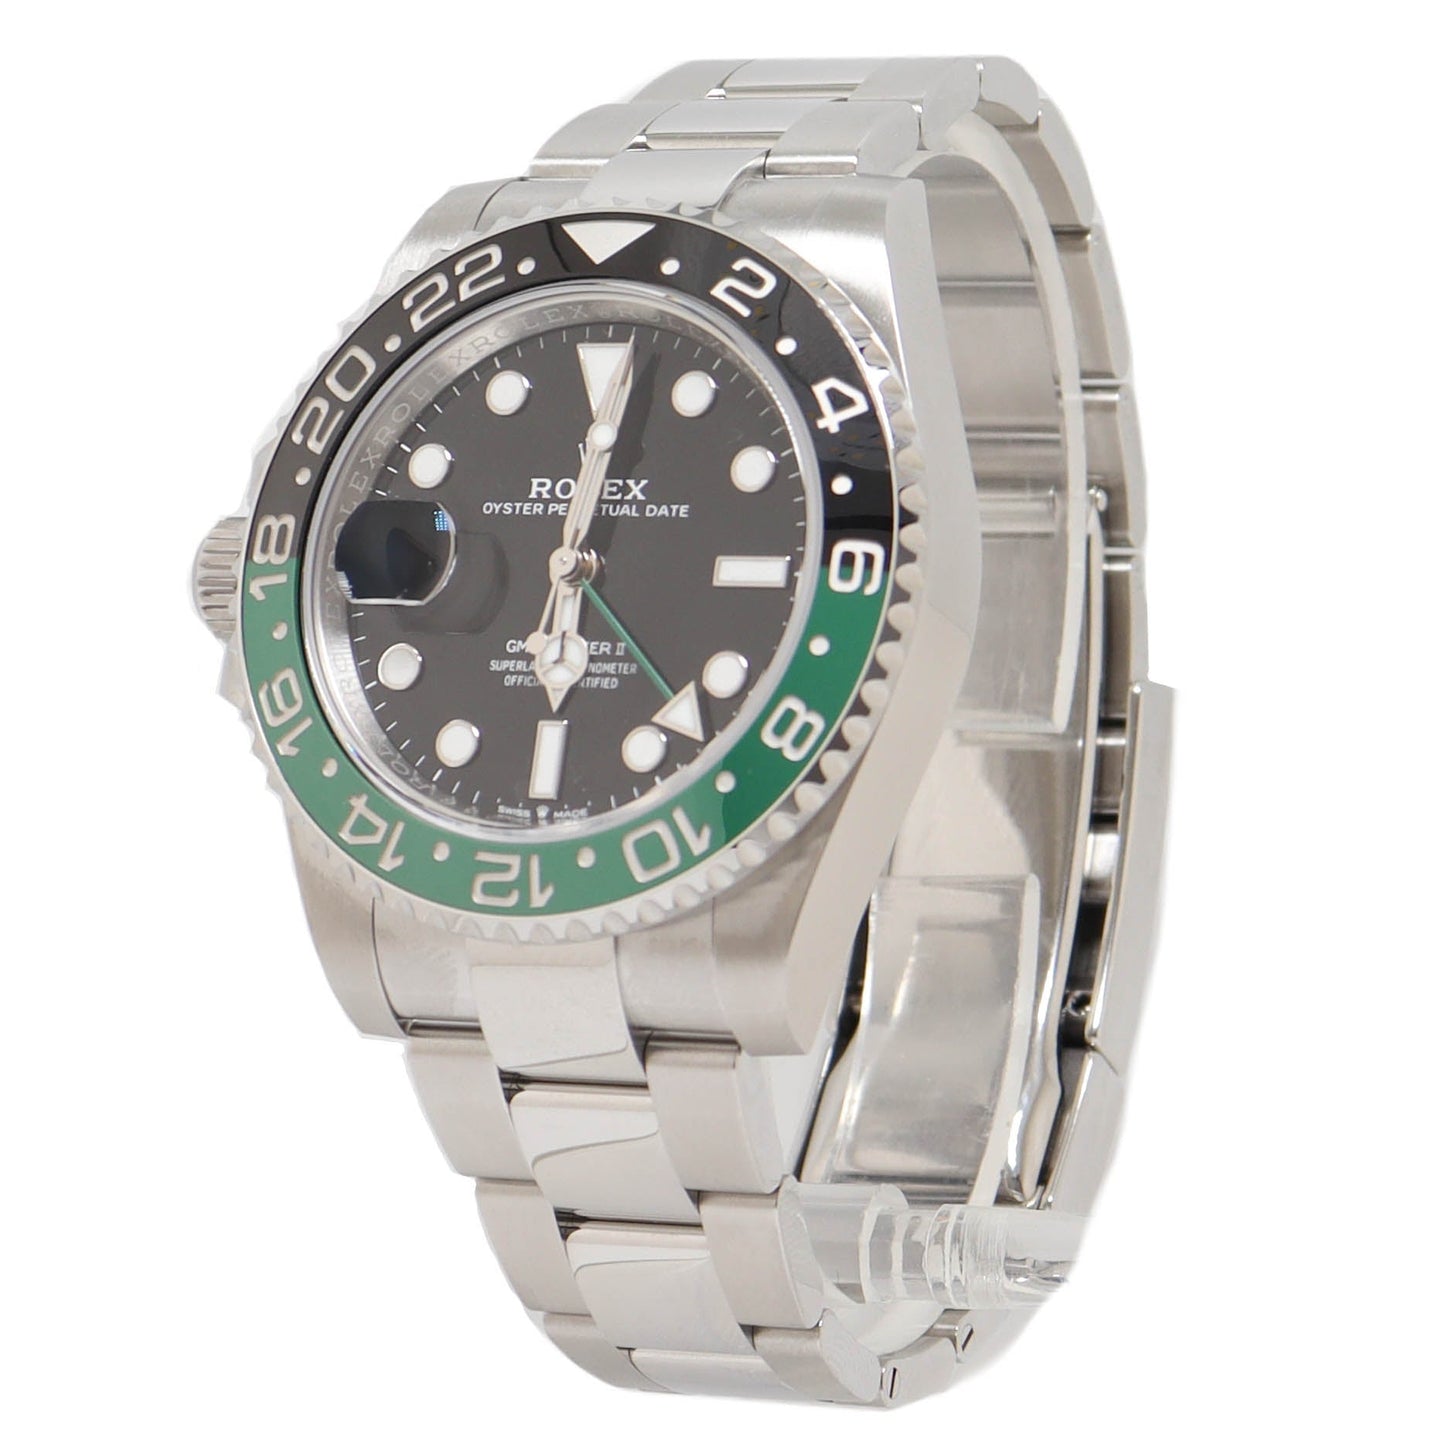 Rolex GMT Master II “Sprite” Stainless Steel 40mm Black Dot Dial Watch Reference# 126720VTNR